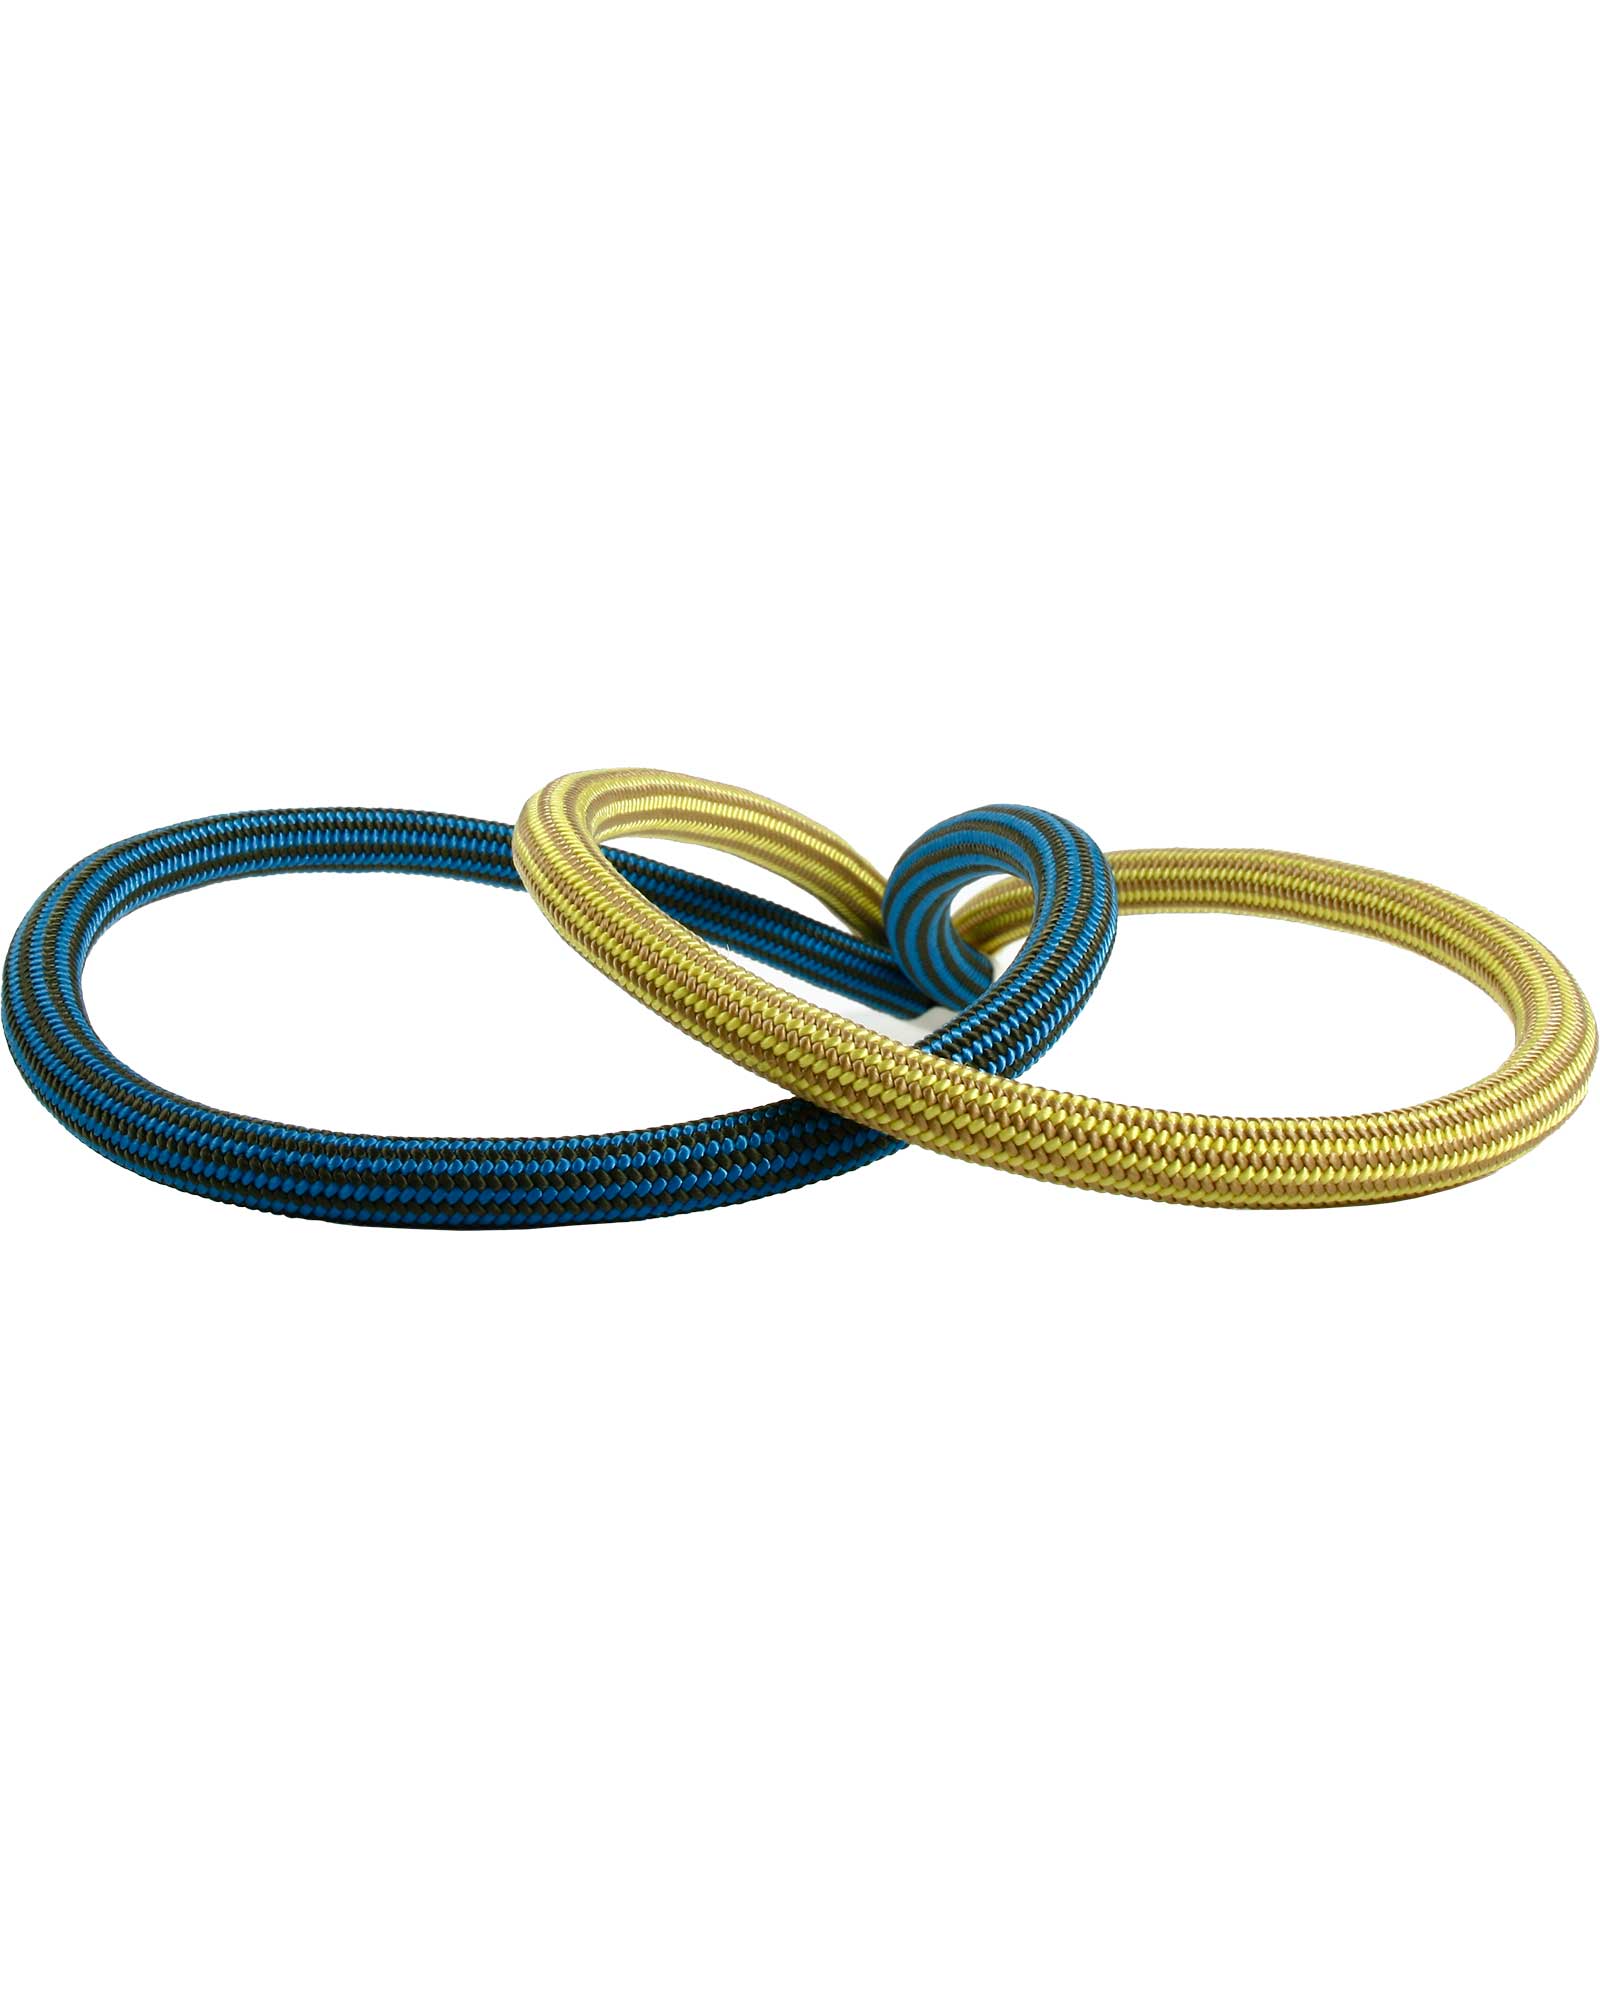 Edelweiss Lithium 8.5mm x 60m Rope - Yellow 60m